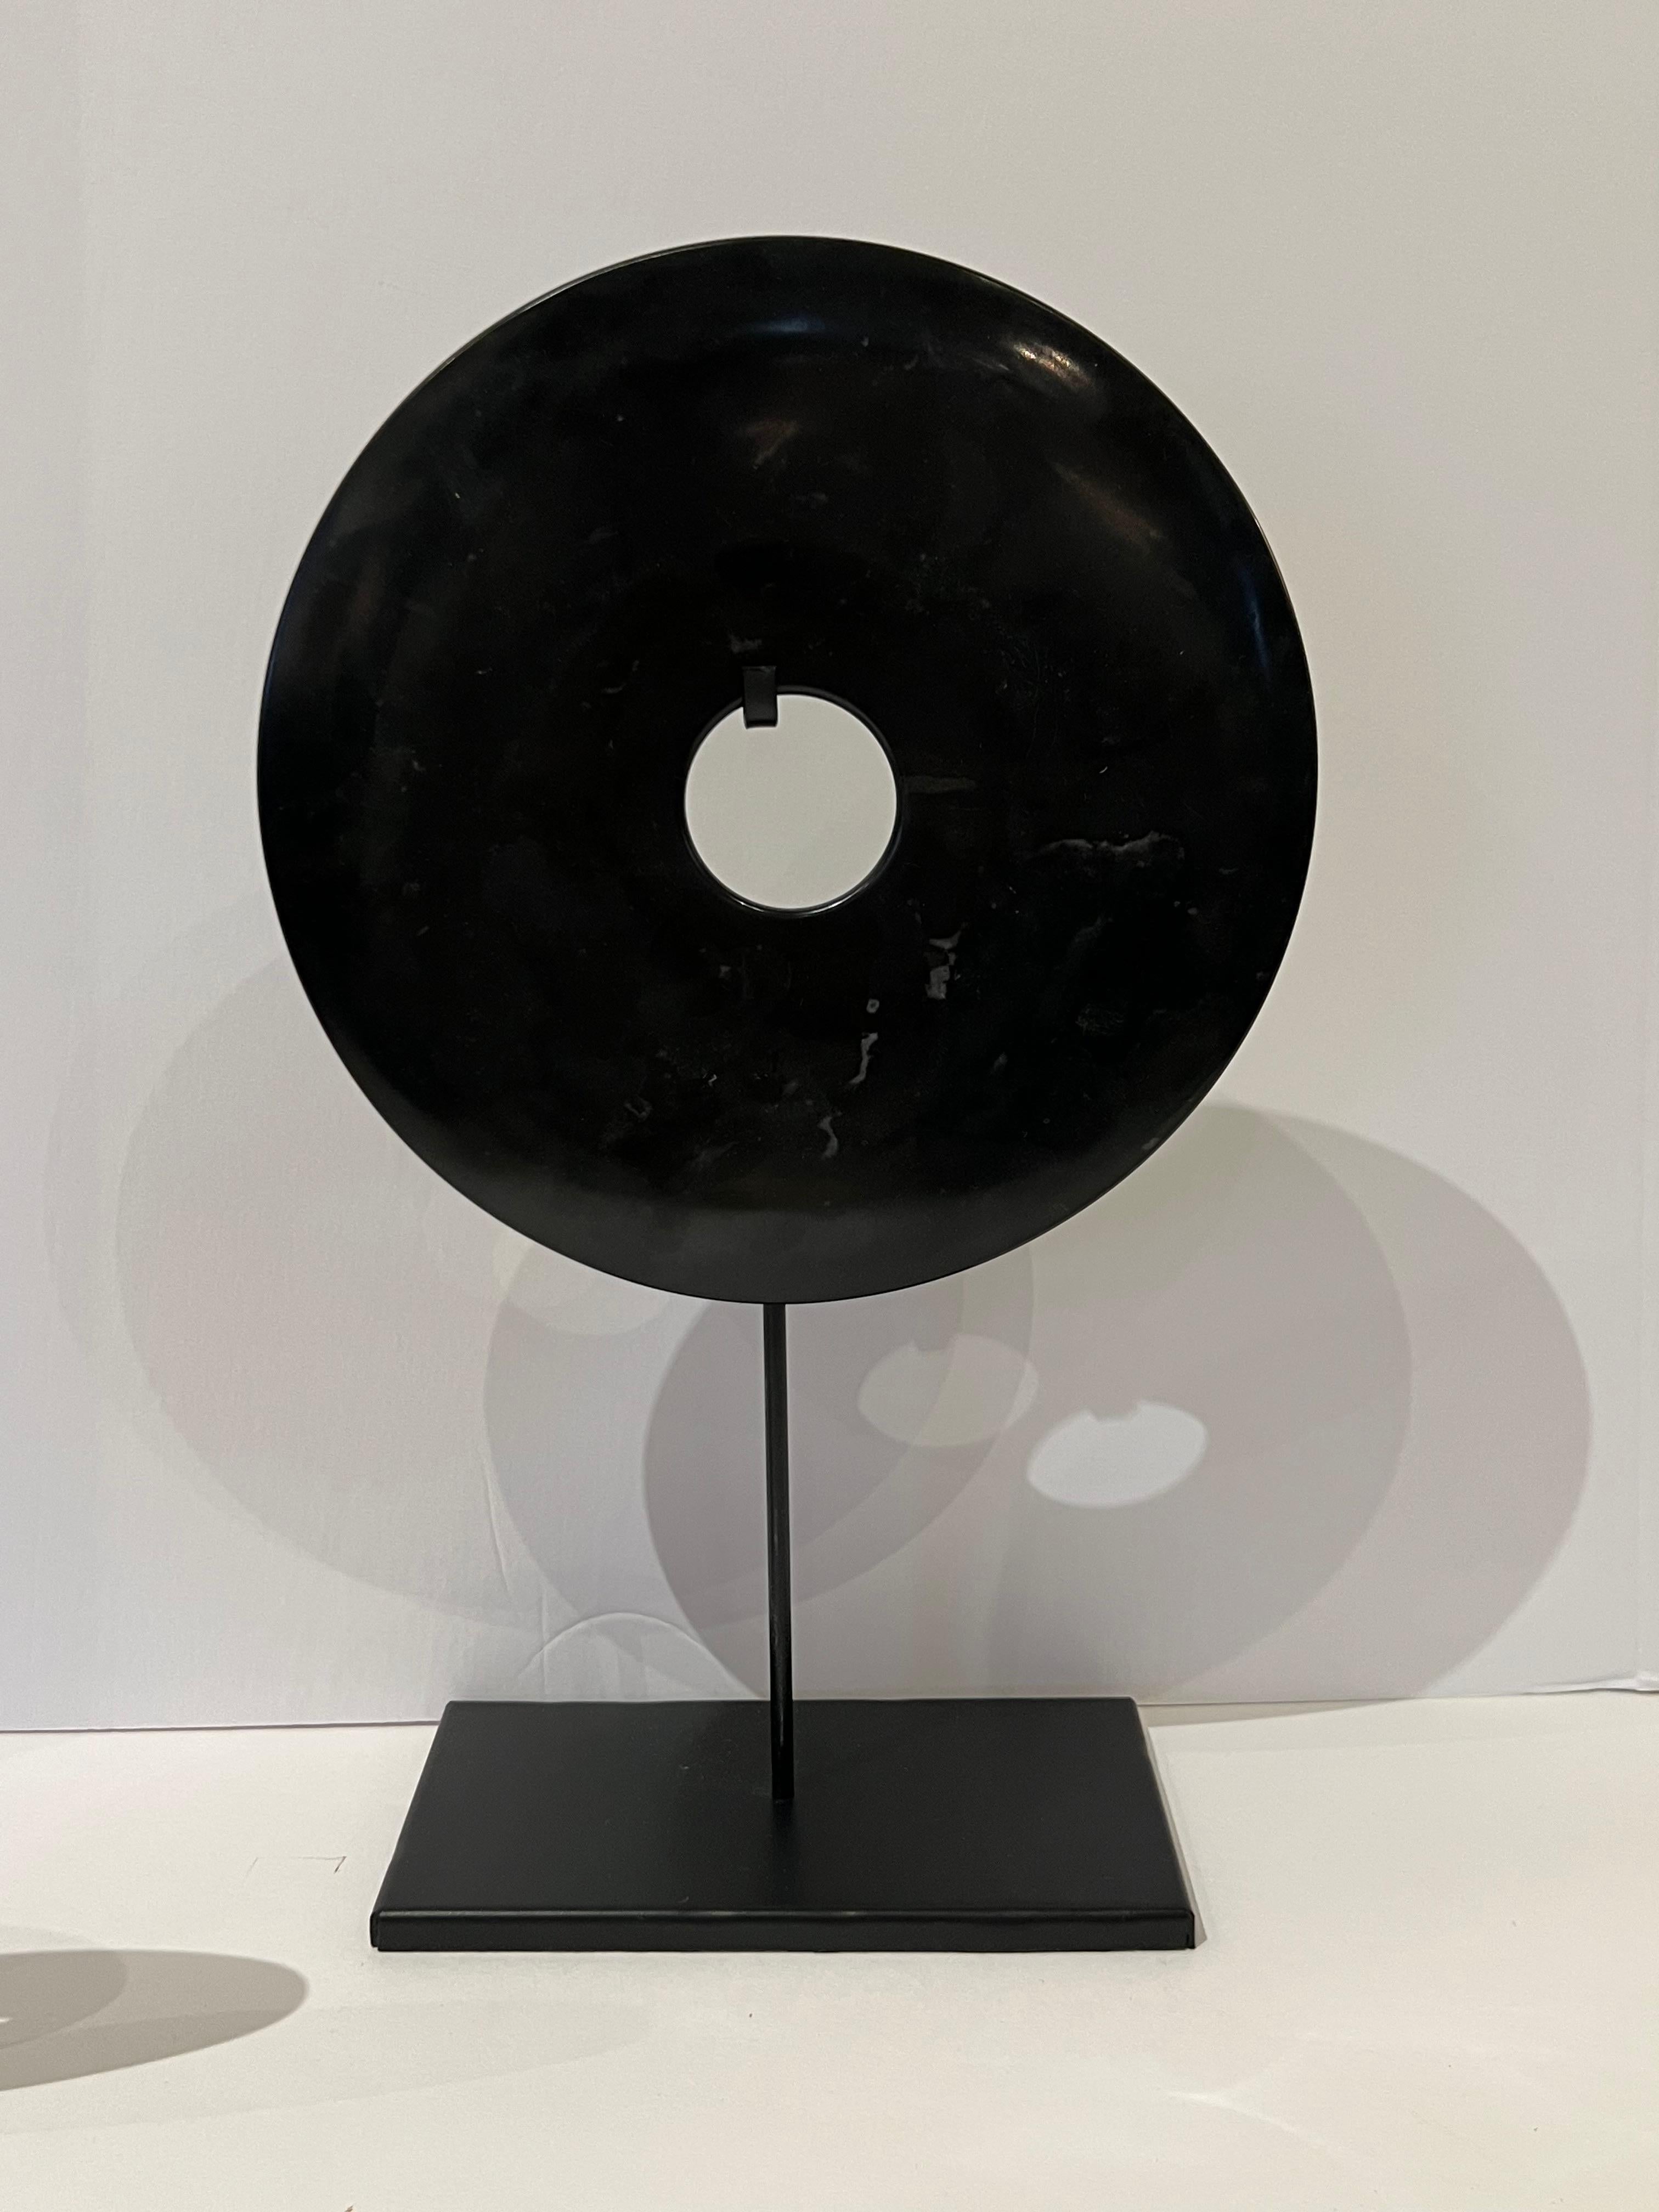 Contemporary Chinese set of three smooth black jade discs on stands.
Grouping of three different sizes.
Also available in smooth white jade. (S6447 )
6